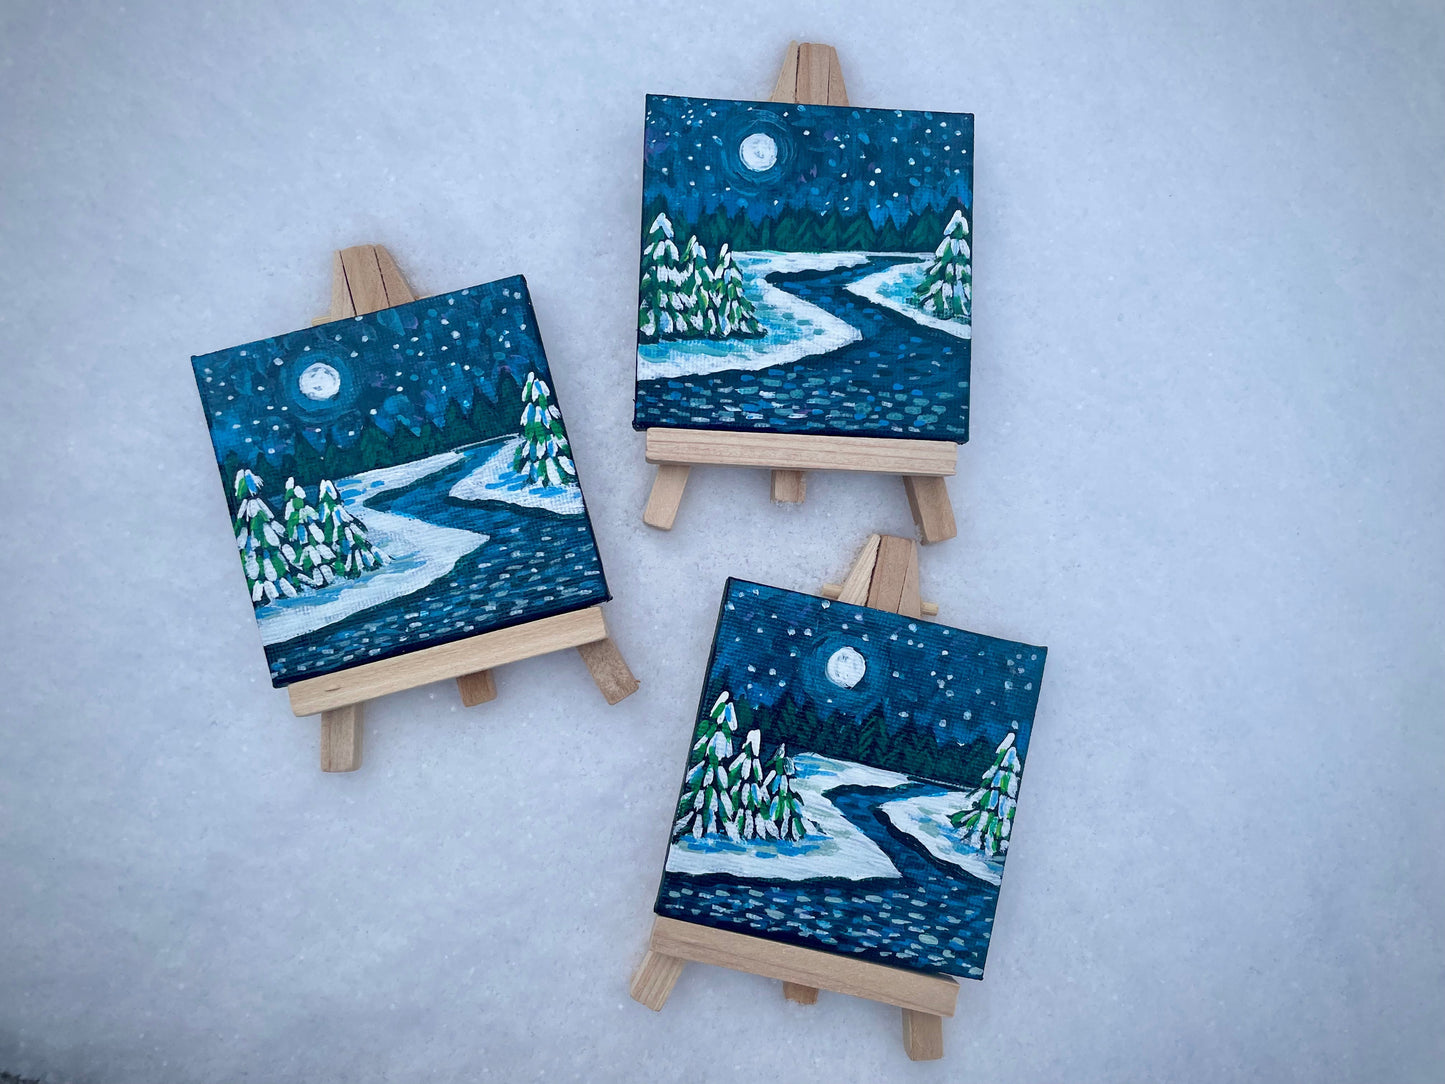 MINI PAINTING with Wood Easel: WINTER MARSH STREAM